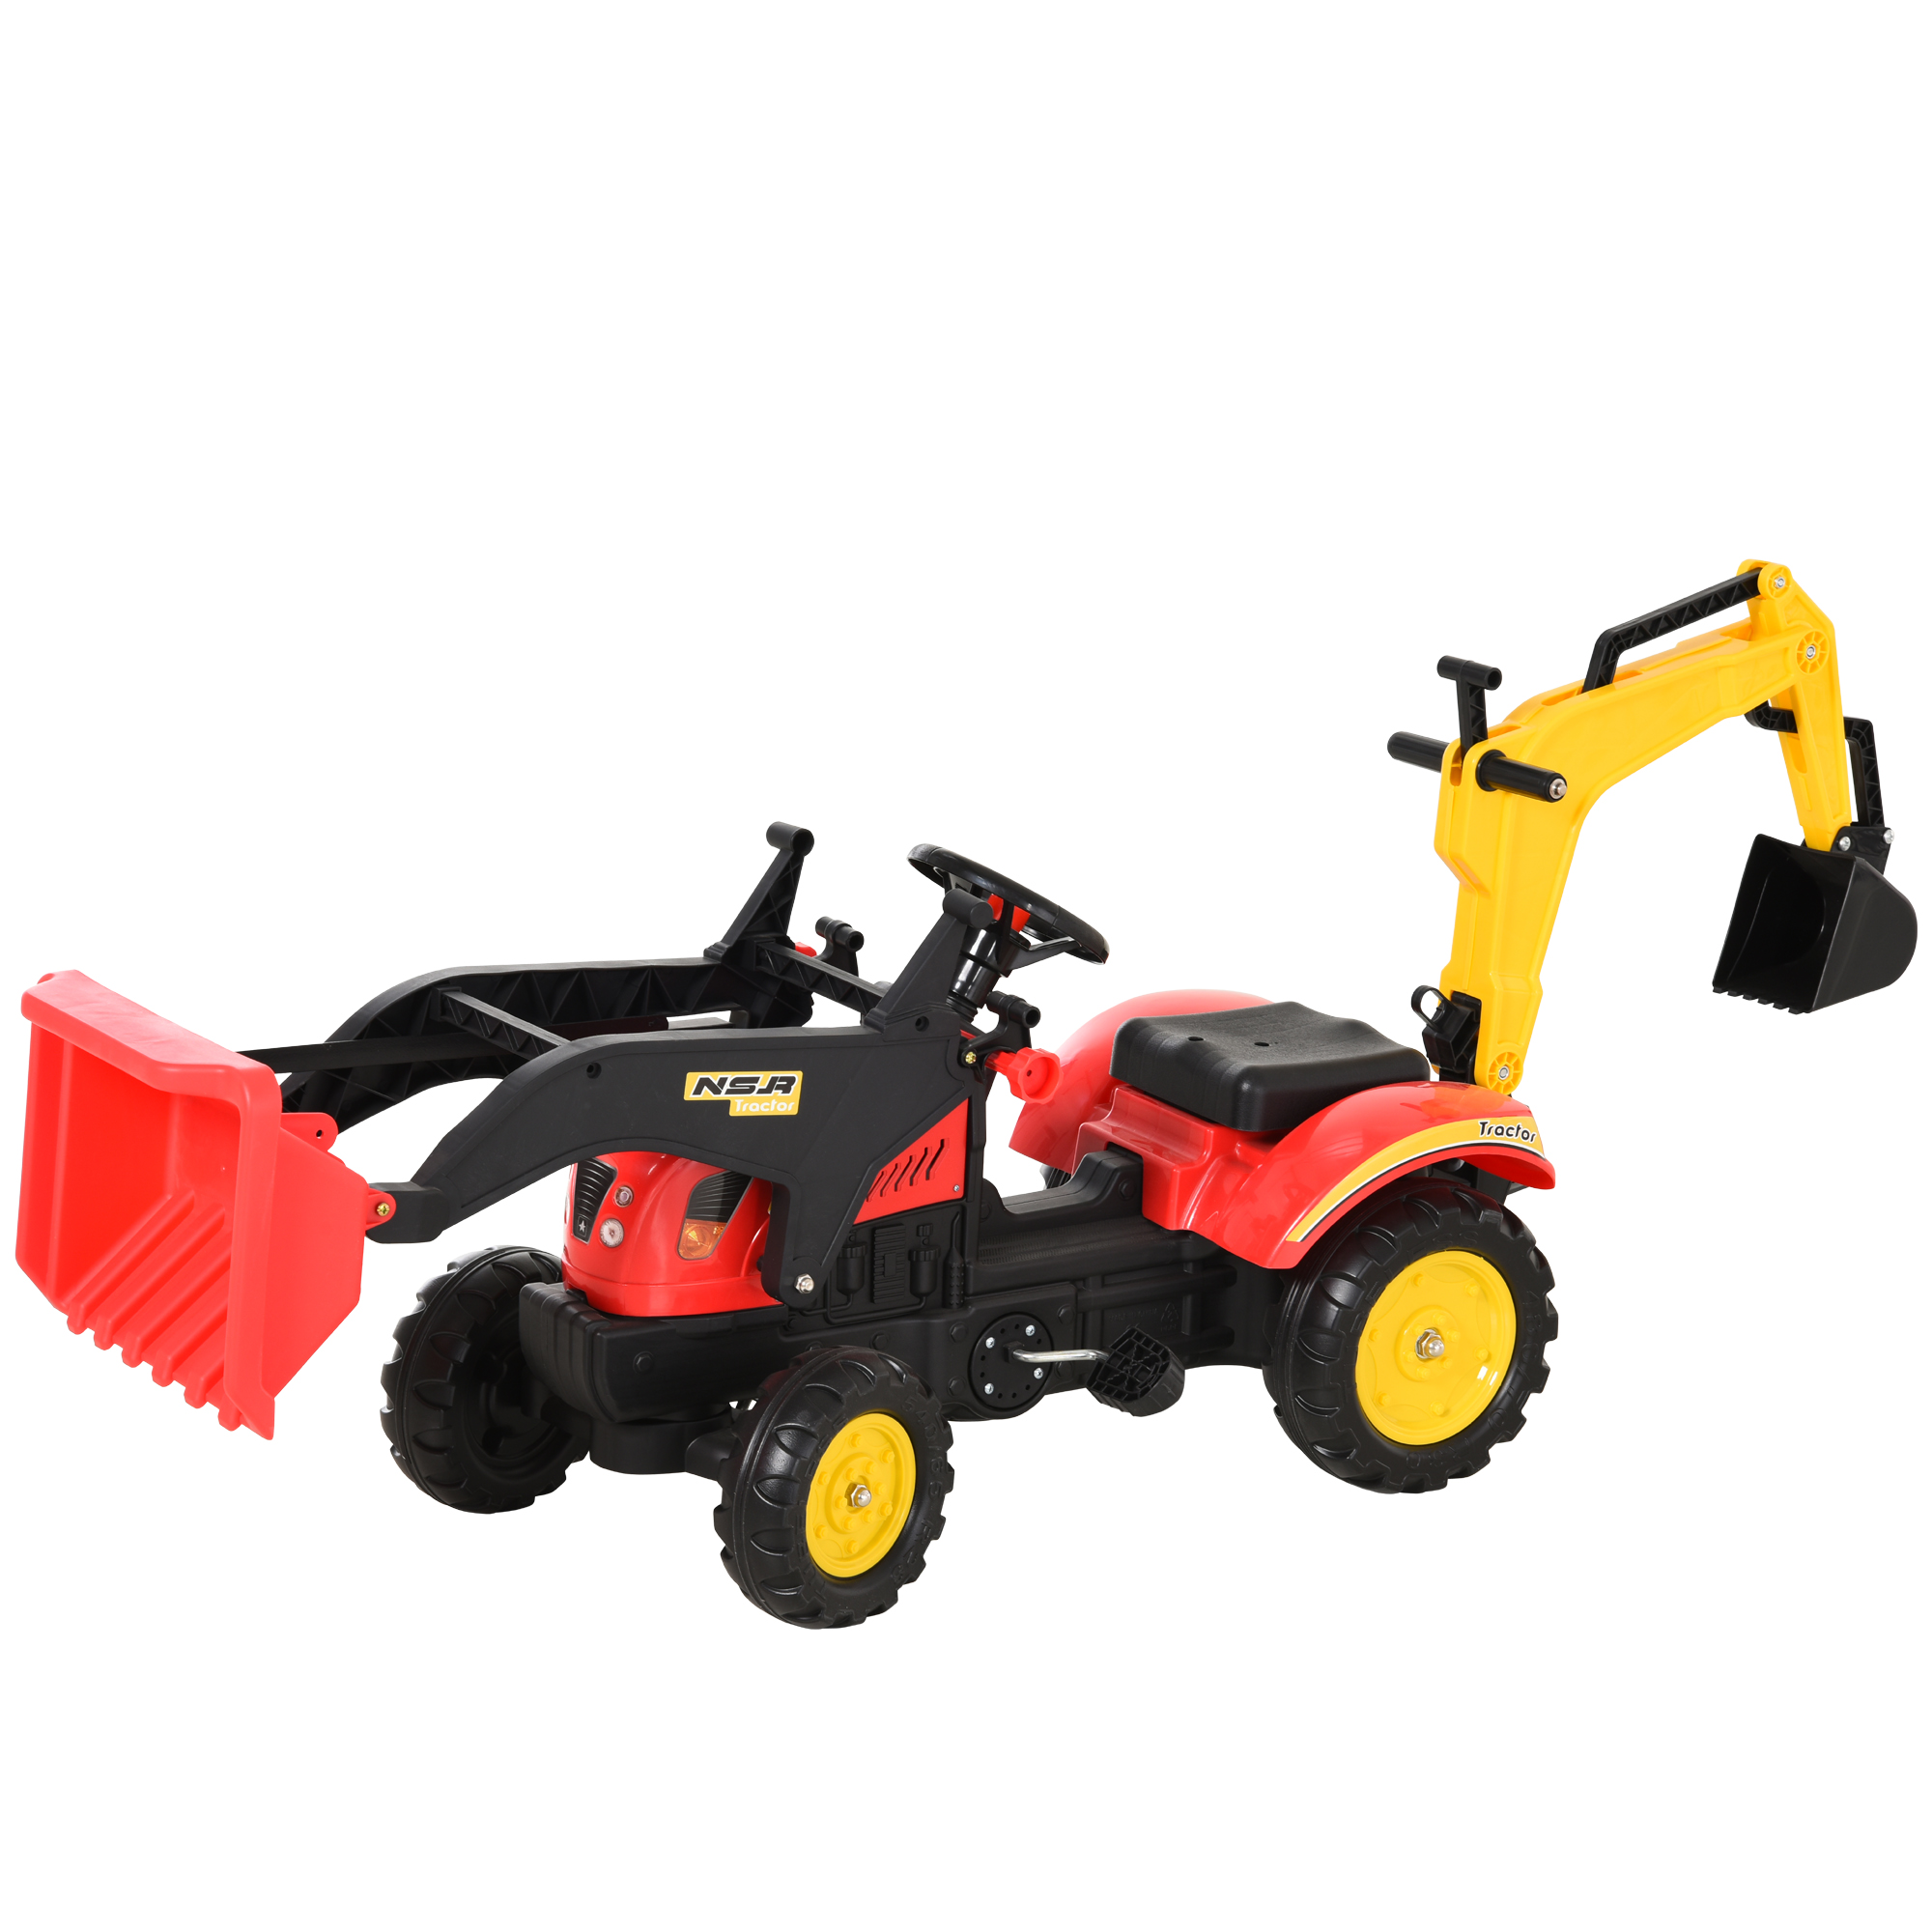 HOMCOM Toy Truck with Pedals